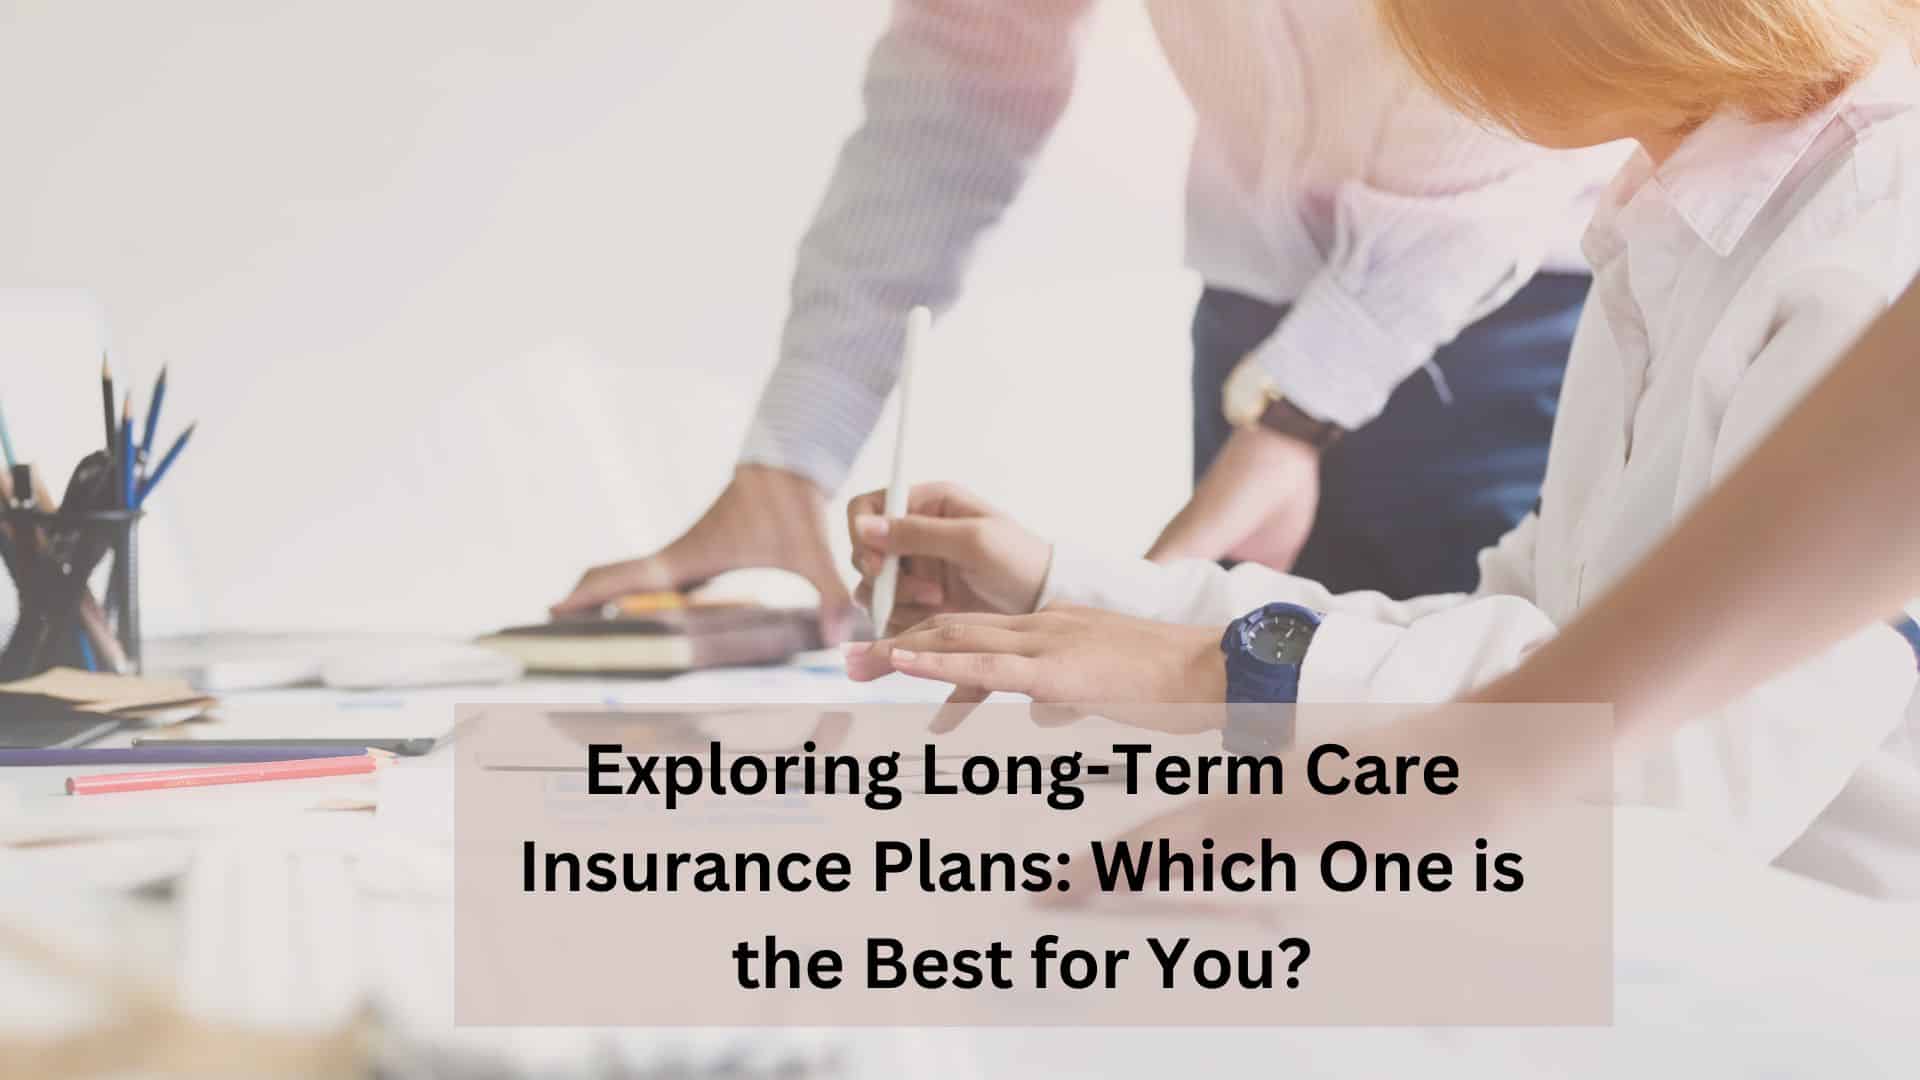 Best Long-Term Care Insurance Plans for You